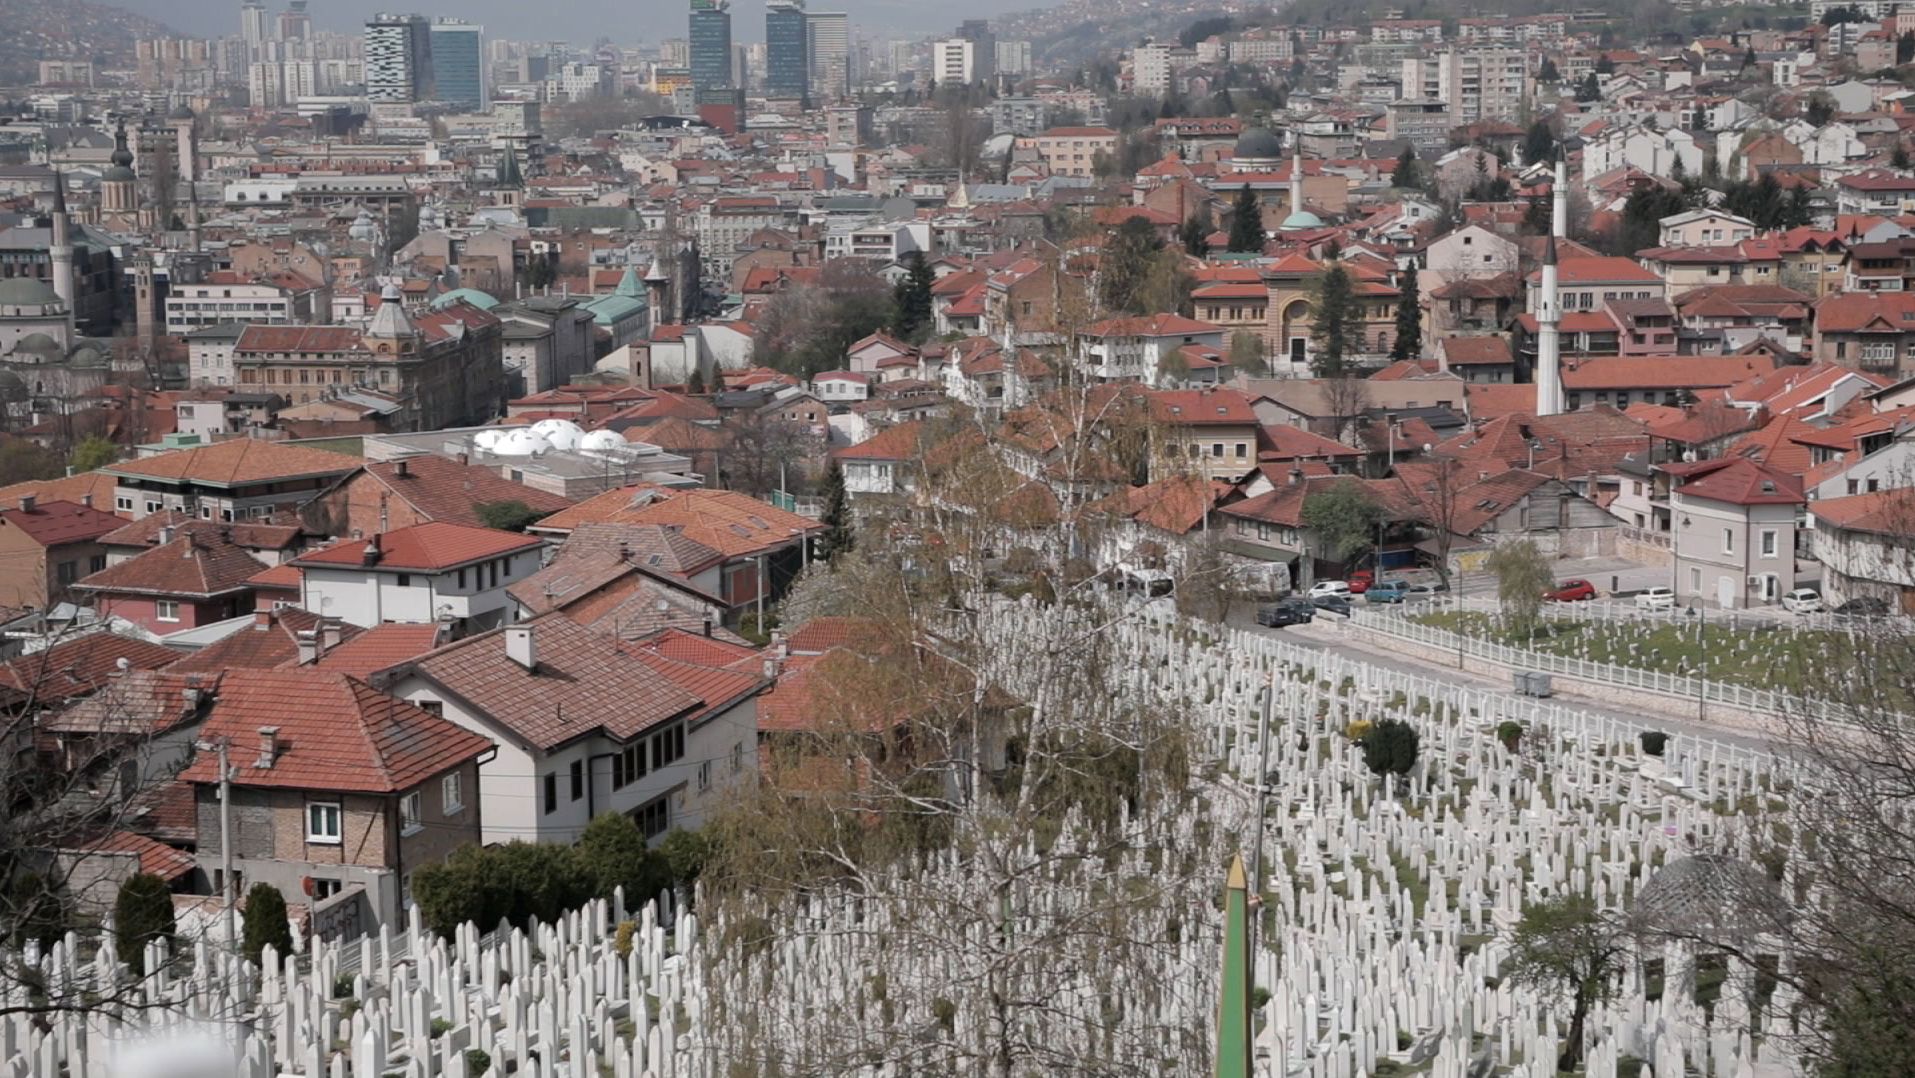 In the hills of Sarajevo, Bosnia and Herzegovina's war dead are marked in row after row of uniform white graves.